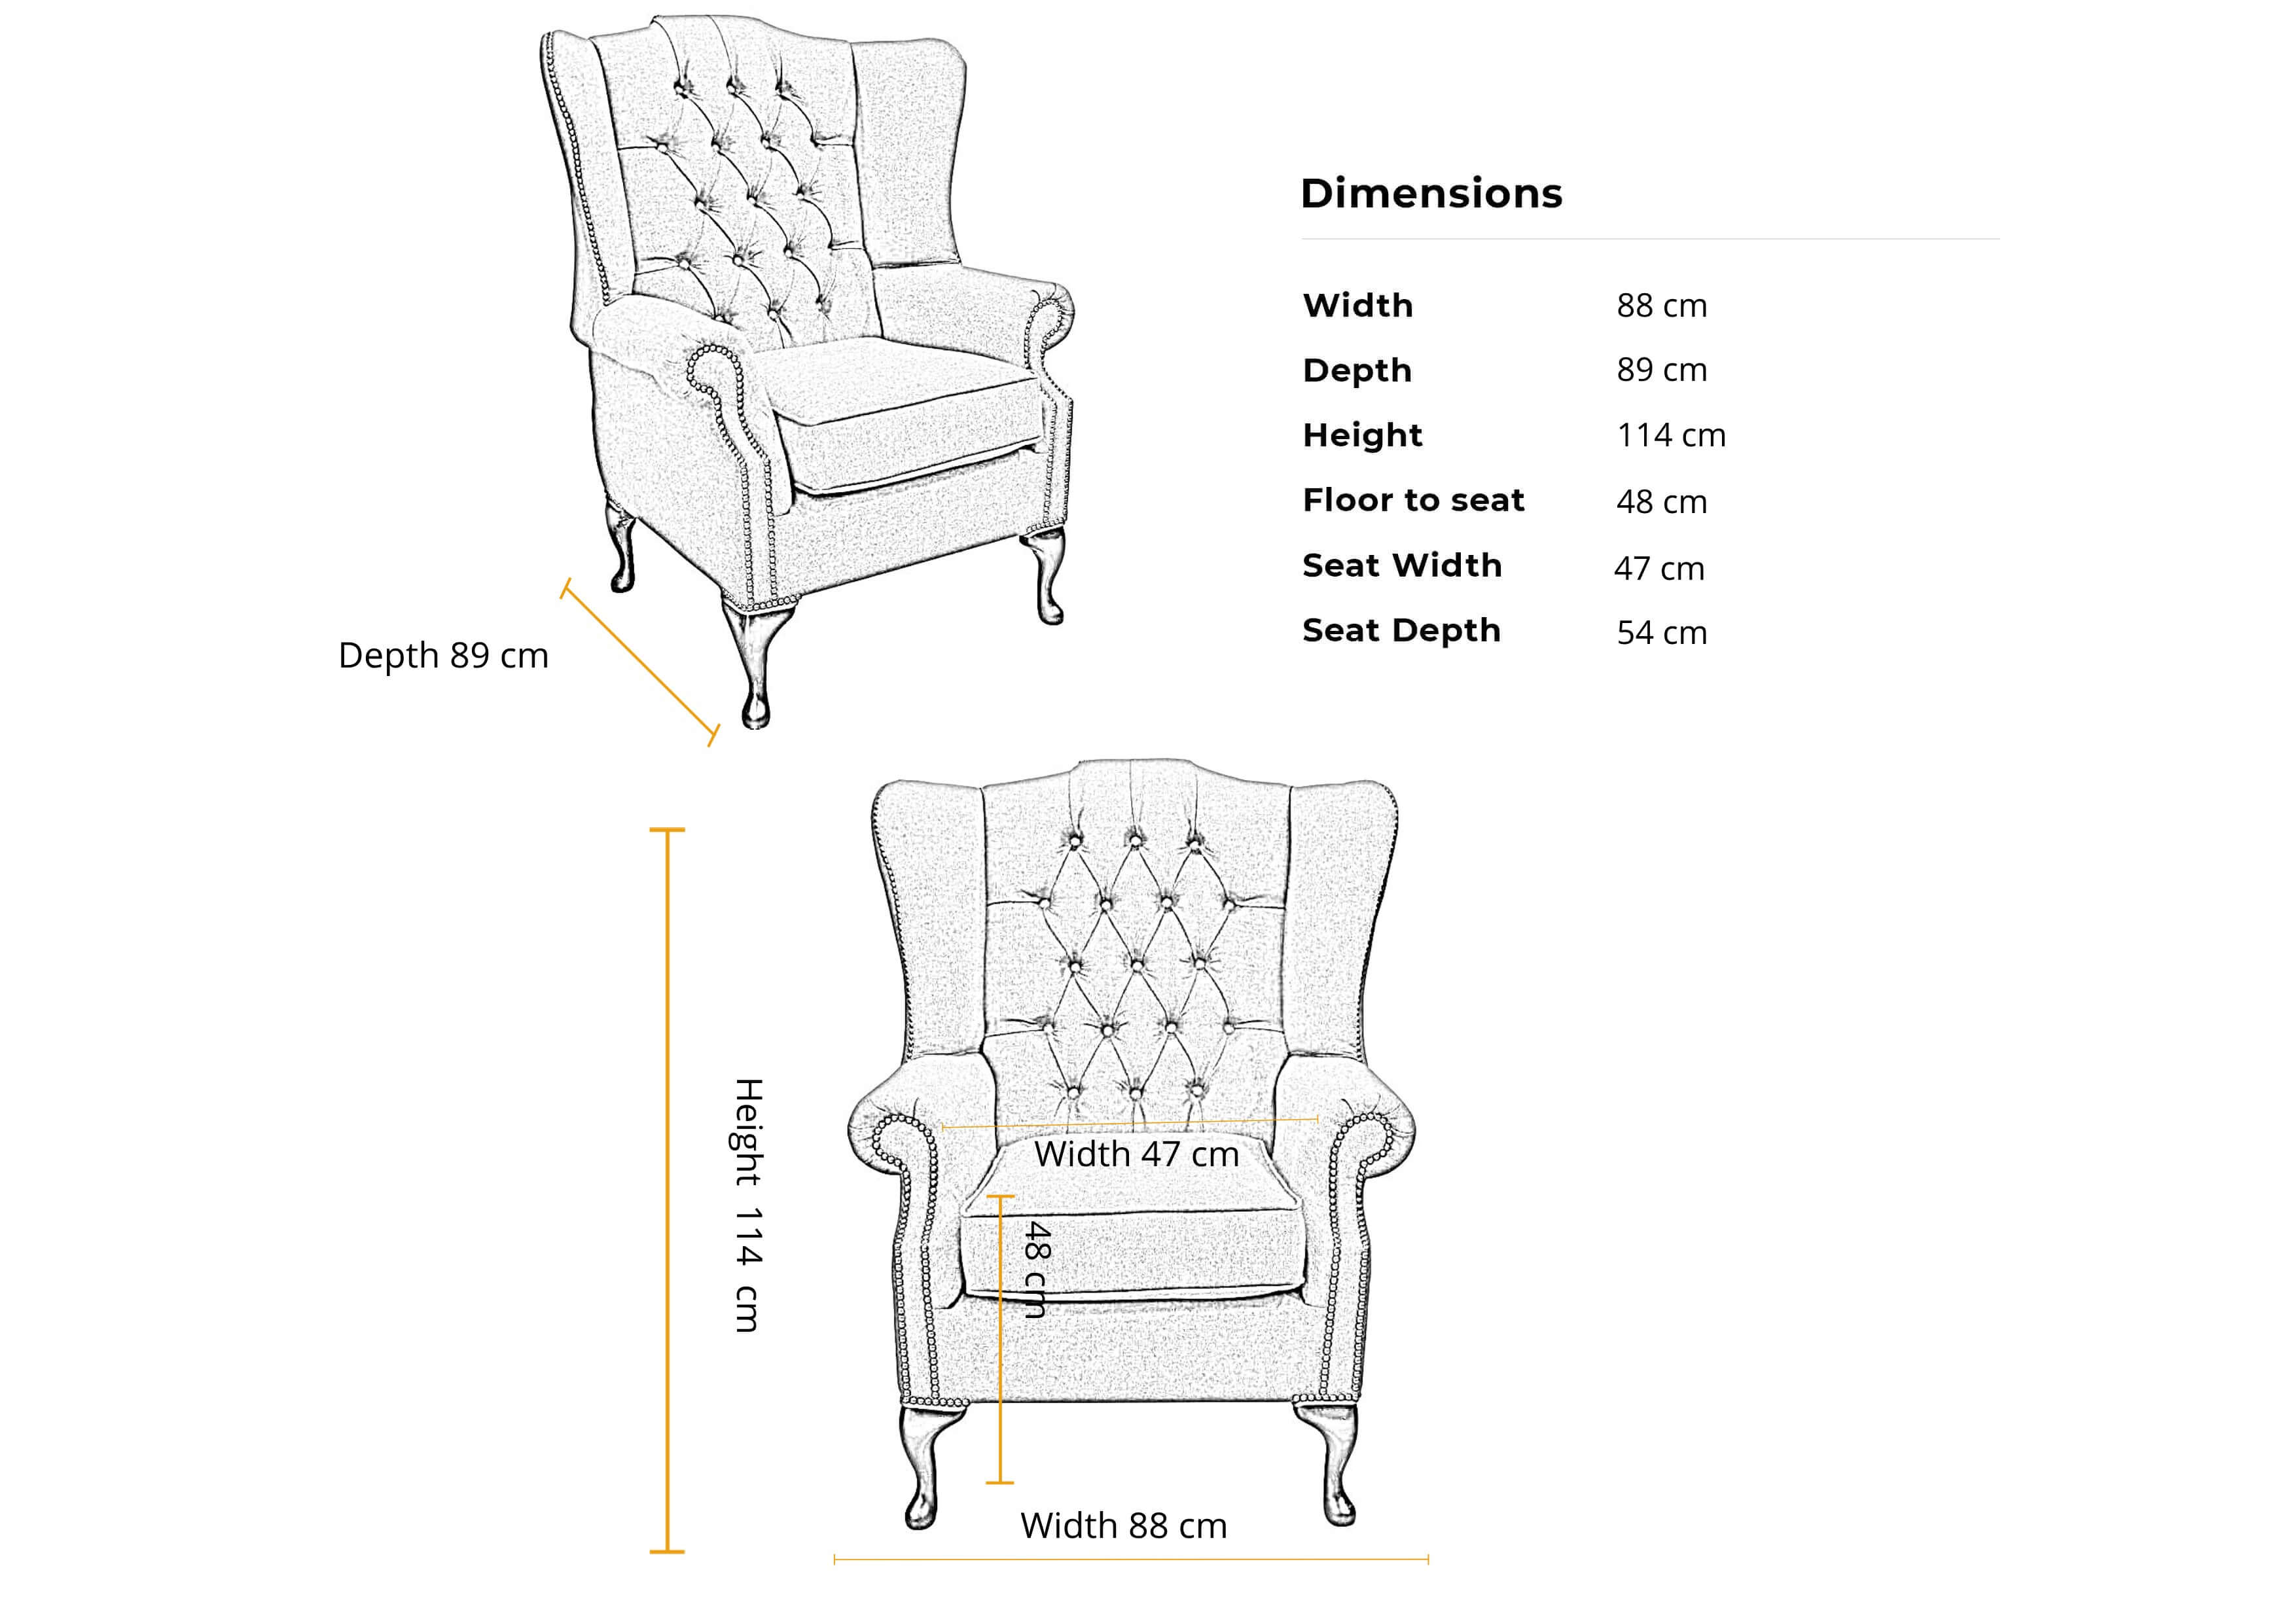 Dimensions 1 seater Prince's Flat Wing Queen Anne High Back Wing Chair fabric